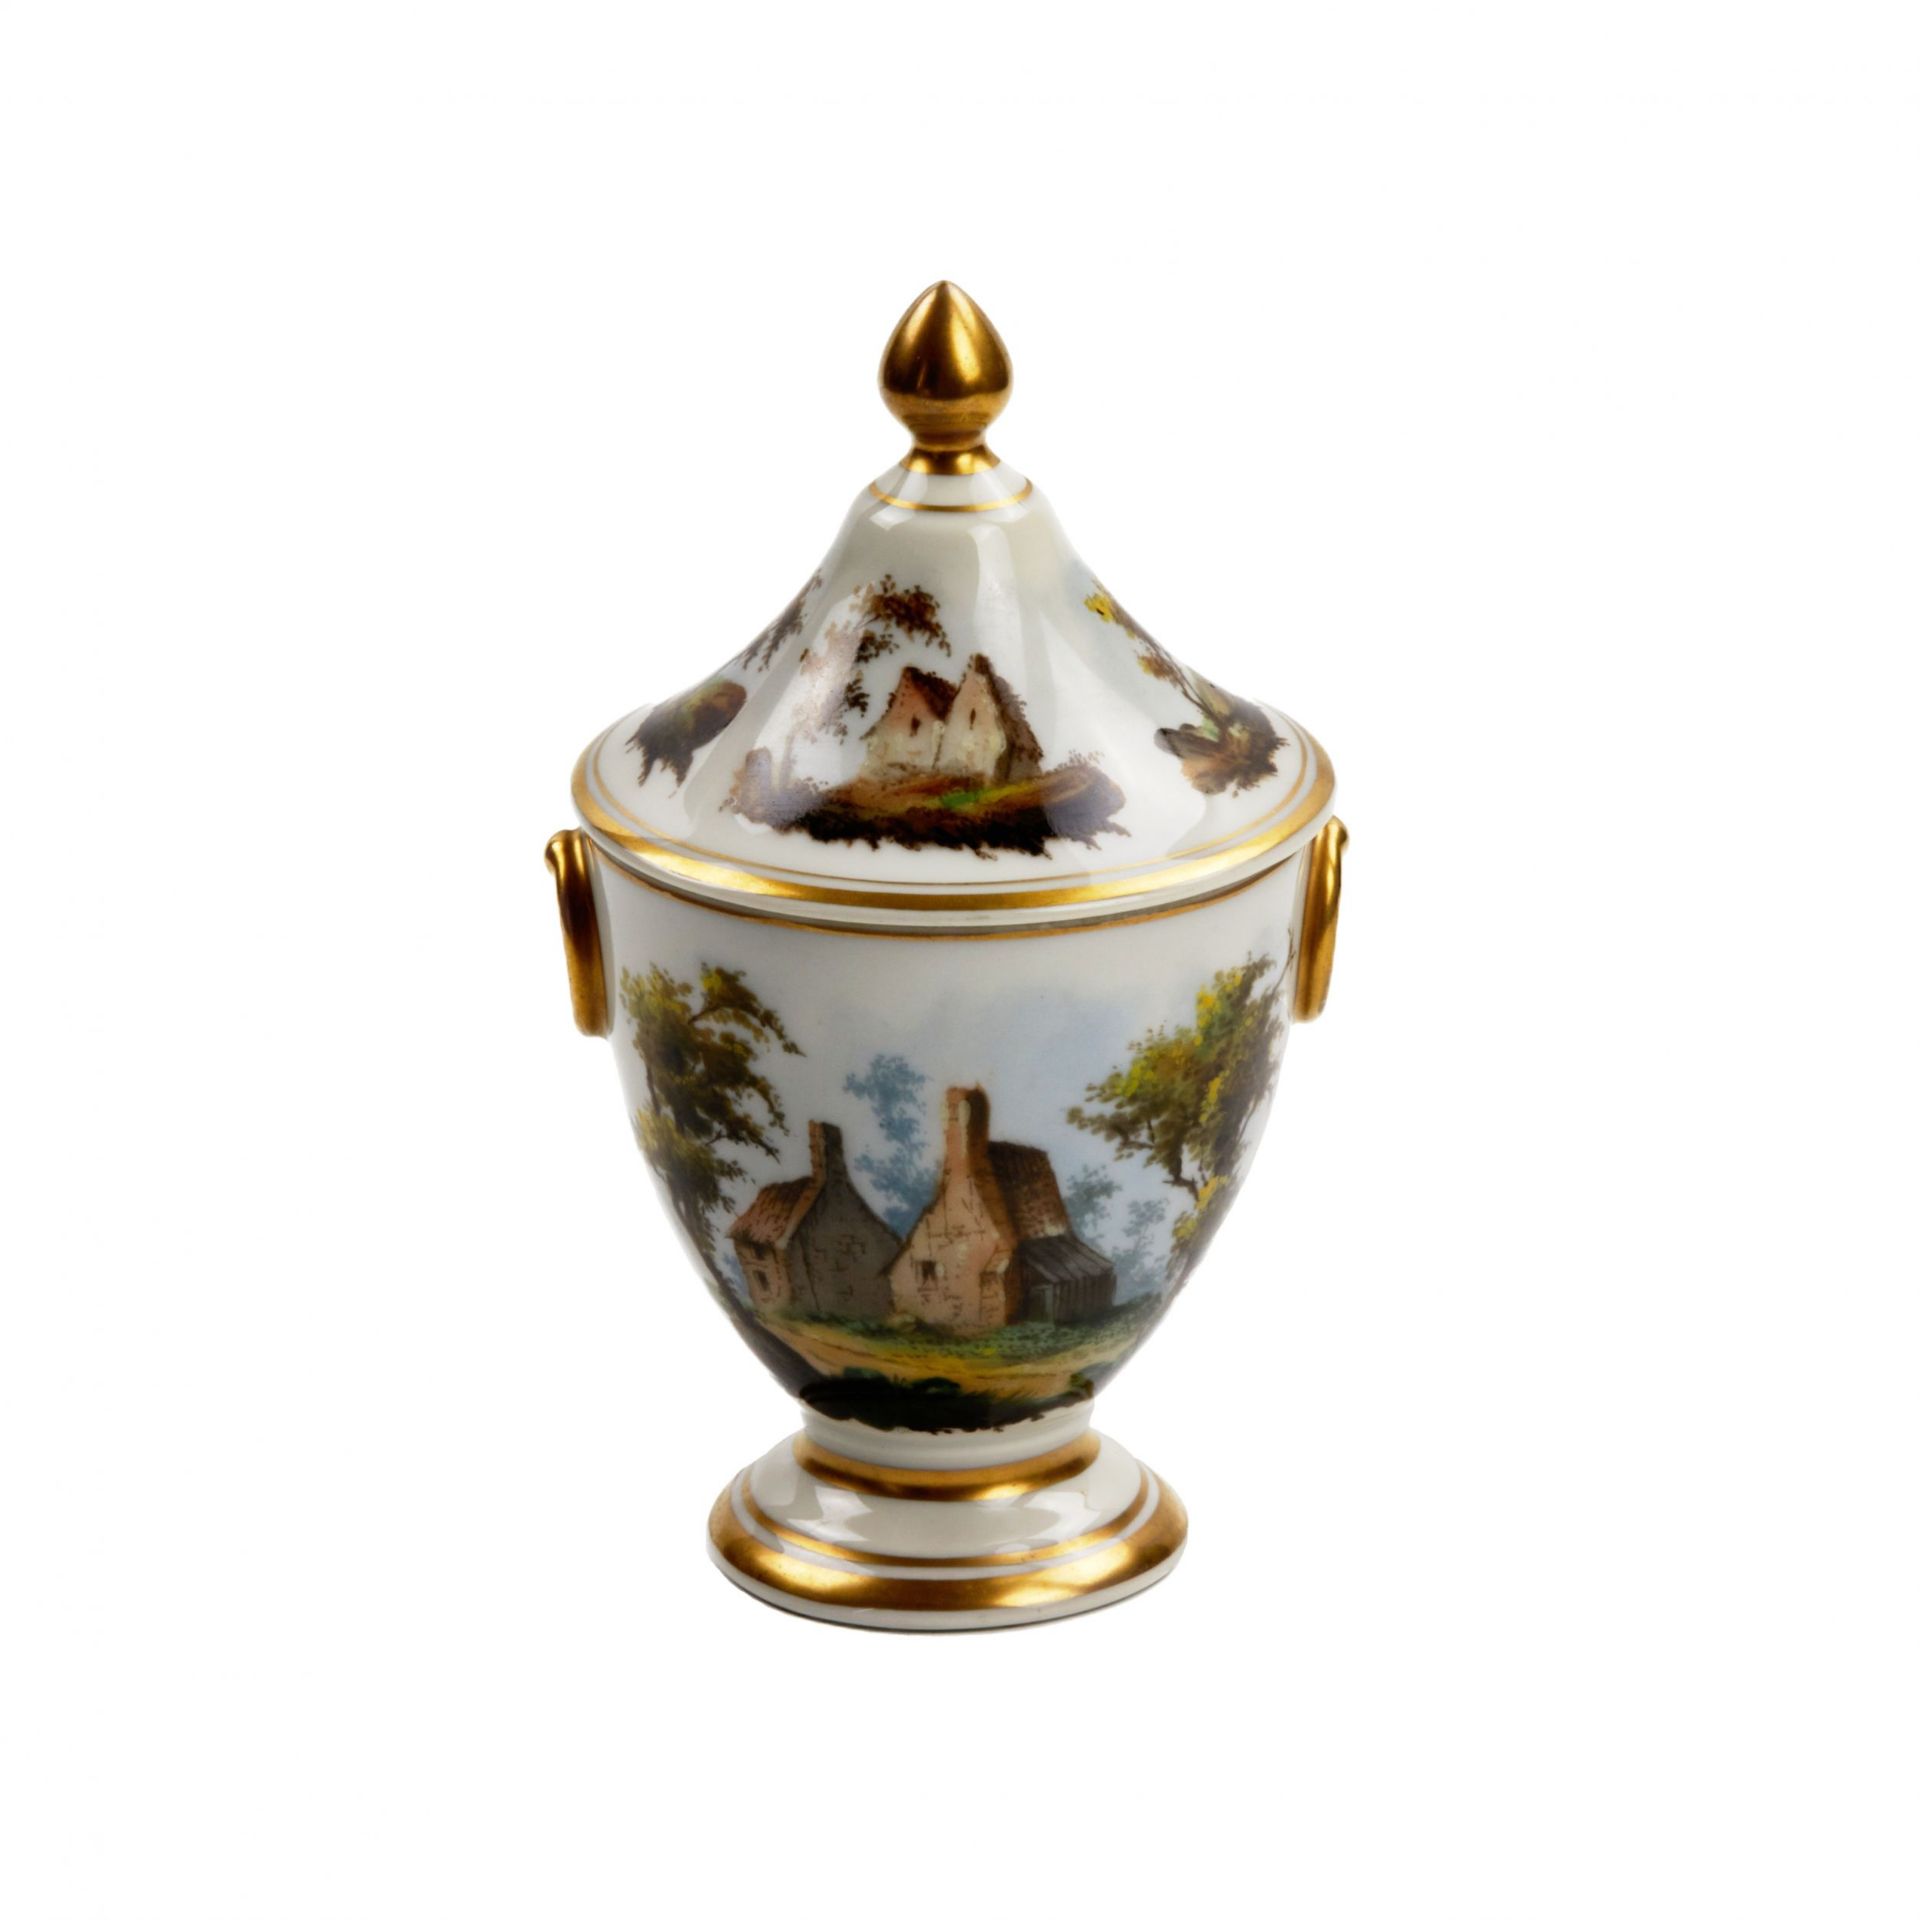 French tete-a-tete porcelain service, 19th century. - Image 11 of 19